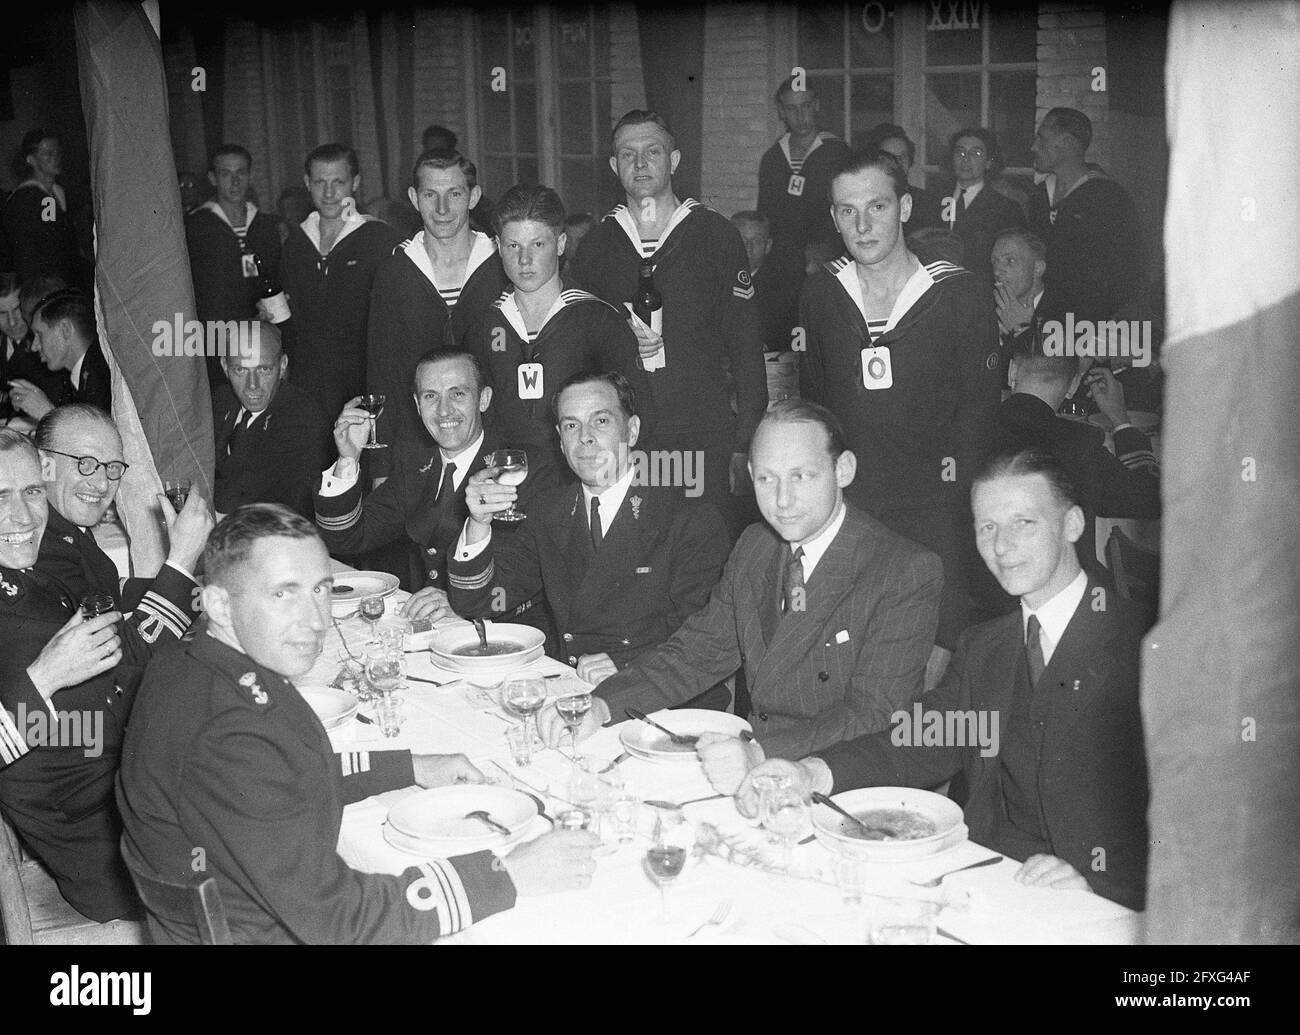 Forty-year anniversary Submarine Service. Dinner officers reunites. Overview, June 18, 1947, anniversaries, meals, Navy, The Netherlands, 20th century press agency photo, news to remember, documentary, historic photography 1945-1990, visual stories, human history of the Twentieth Century, capturing moments in time Stock Photo